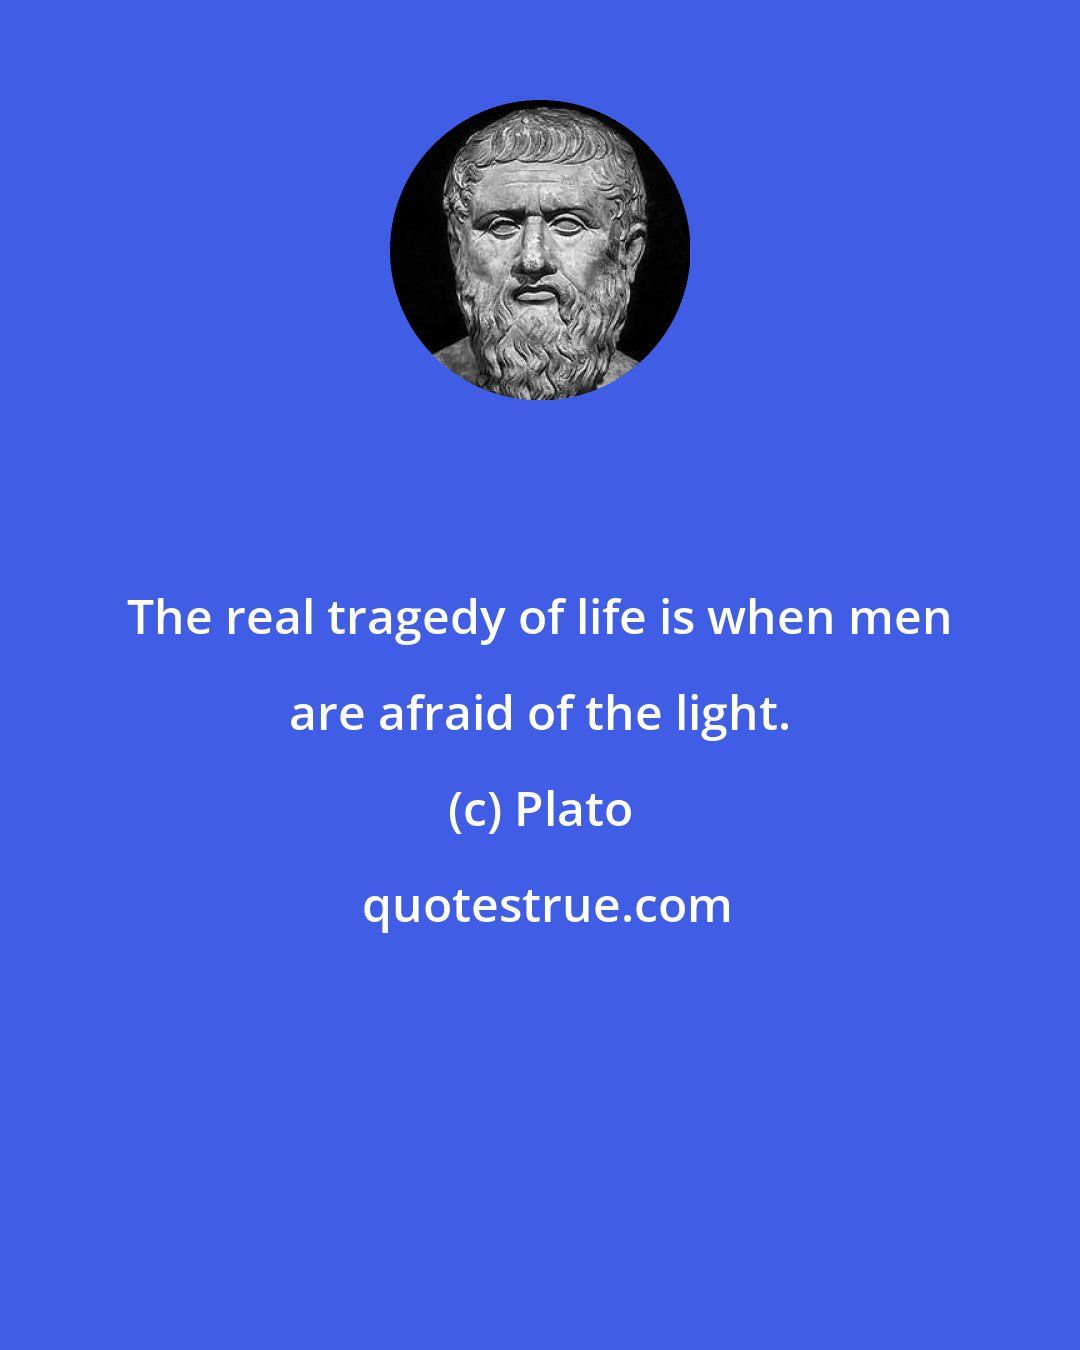 Plato: The real tragedy of life is when men are afraid of the light.